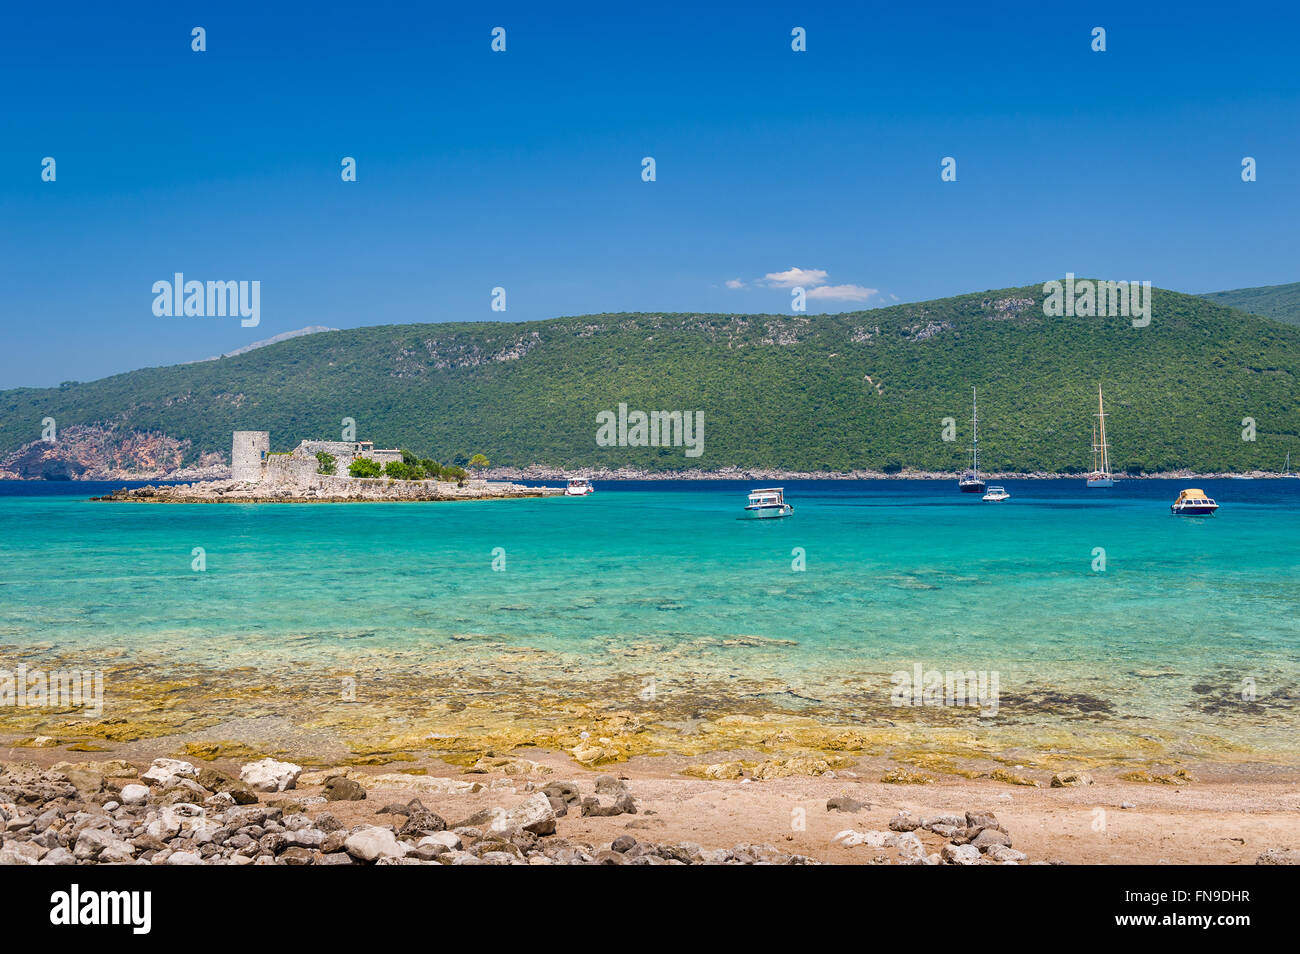 Beautiful turquoise bay, recreational boats and Mirista old fortress on the small island. Stock Photo